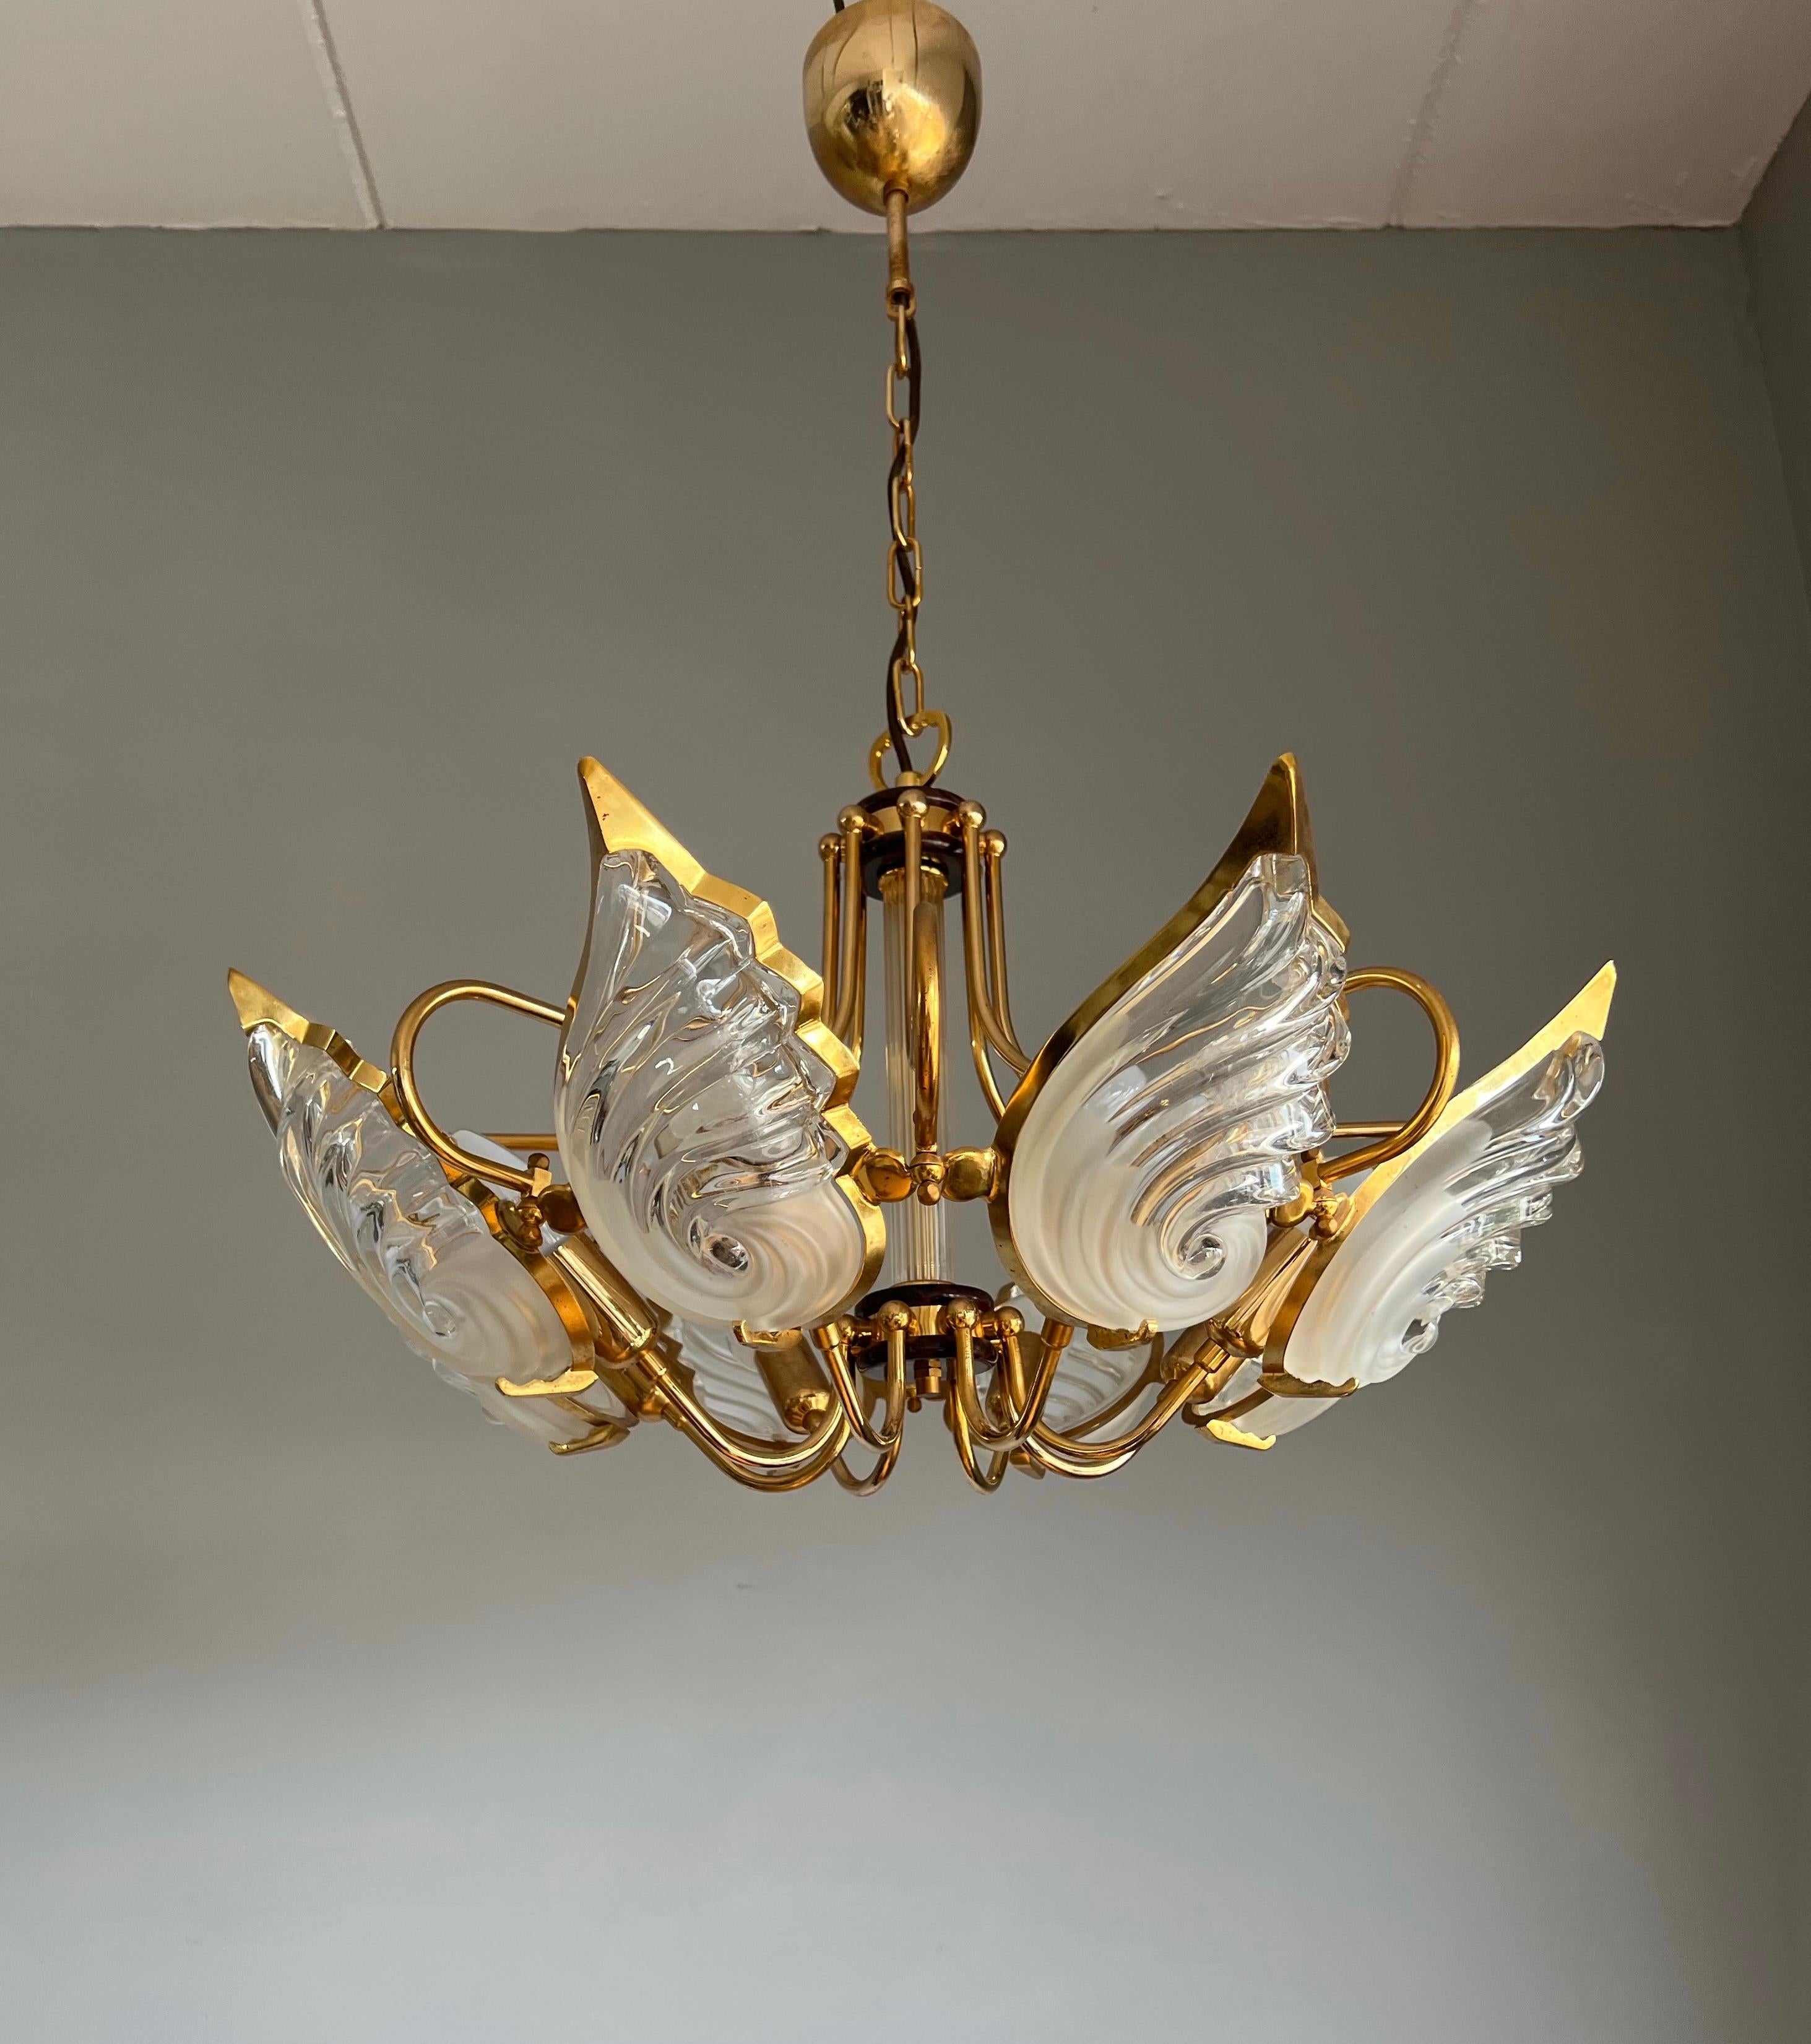 Sculptural and highly decorative eight light fixture.

This wonderful work of lighting art is another one of our recent great finds and it is typical for Southern European midcentury design. However, the fact that works of art like this bring